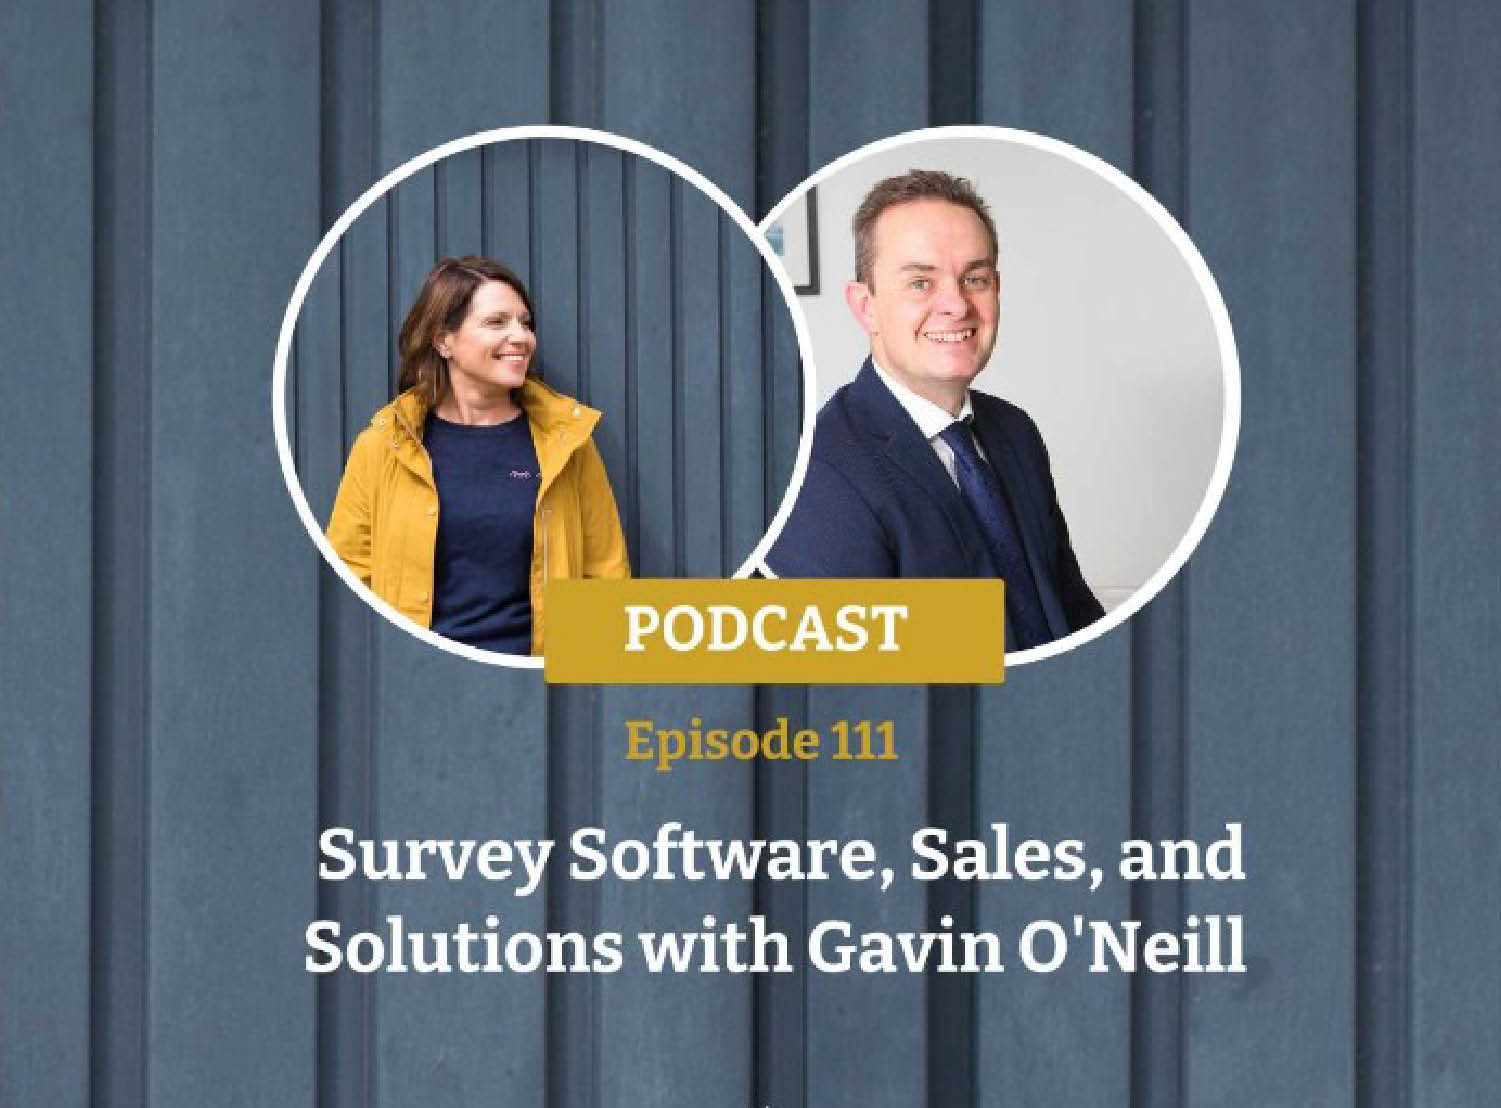 Surveying Software, Sales and Solutions with Gavin O’Neill